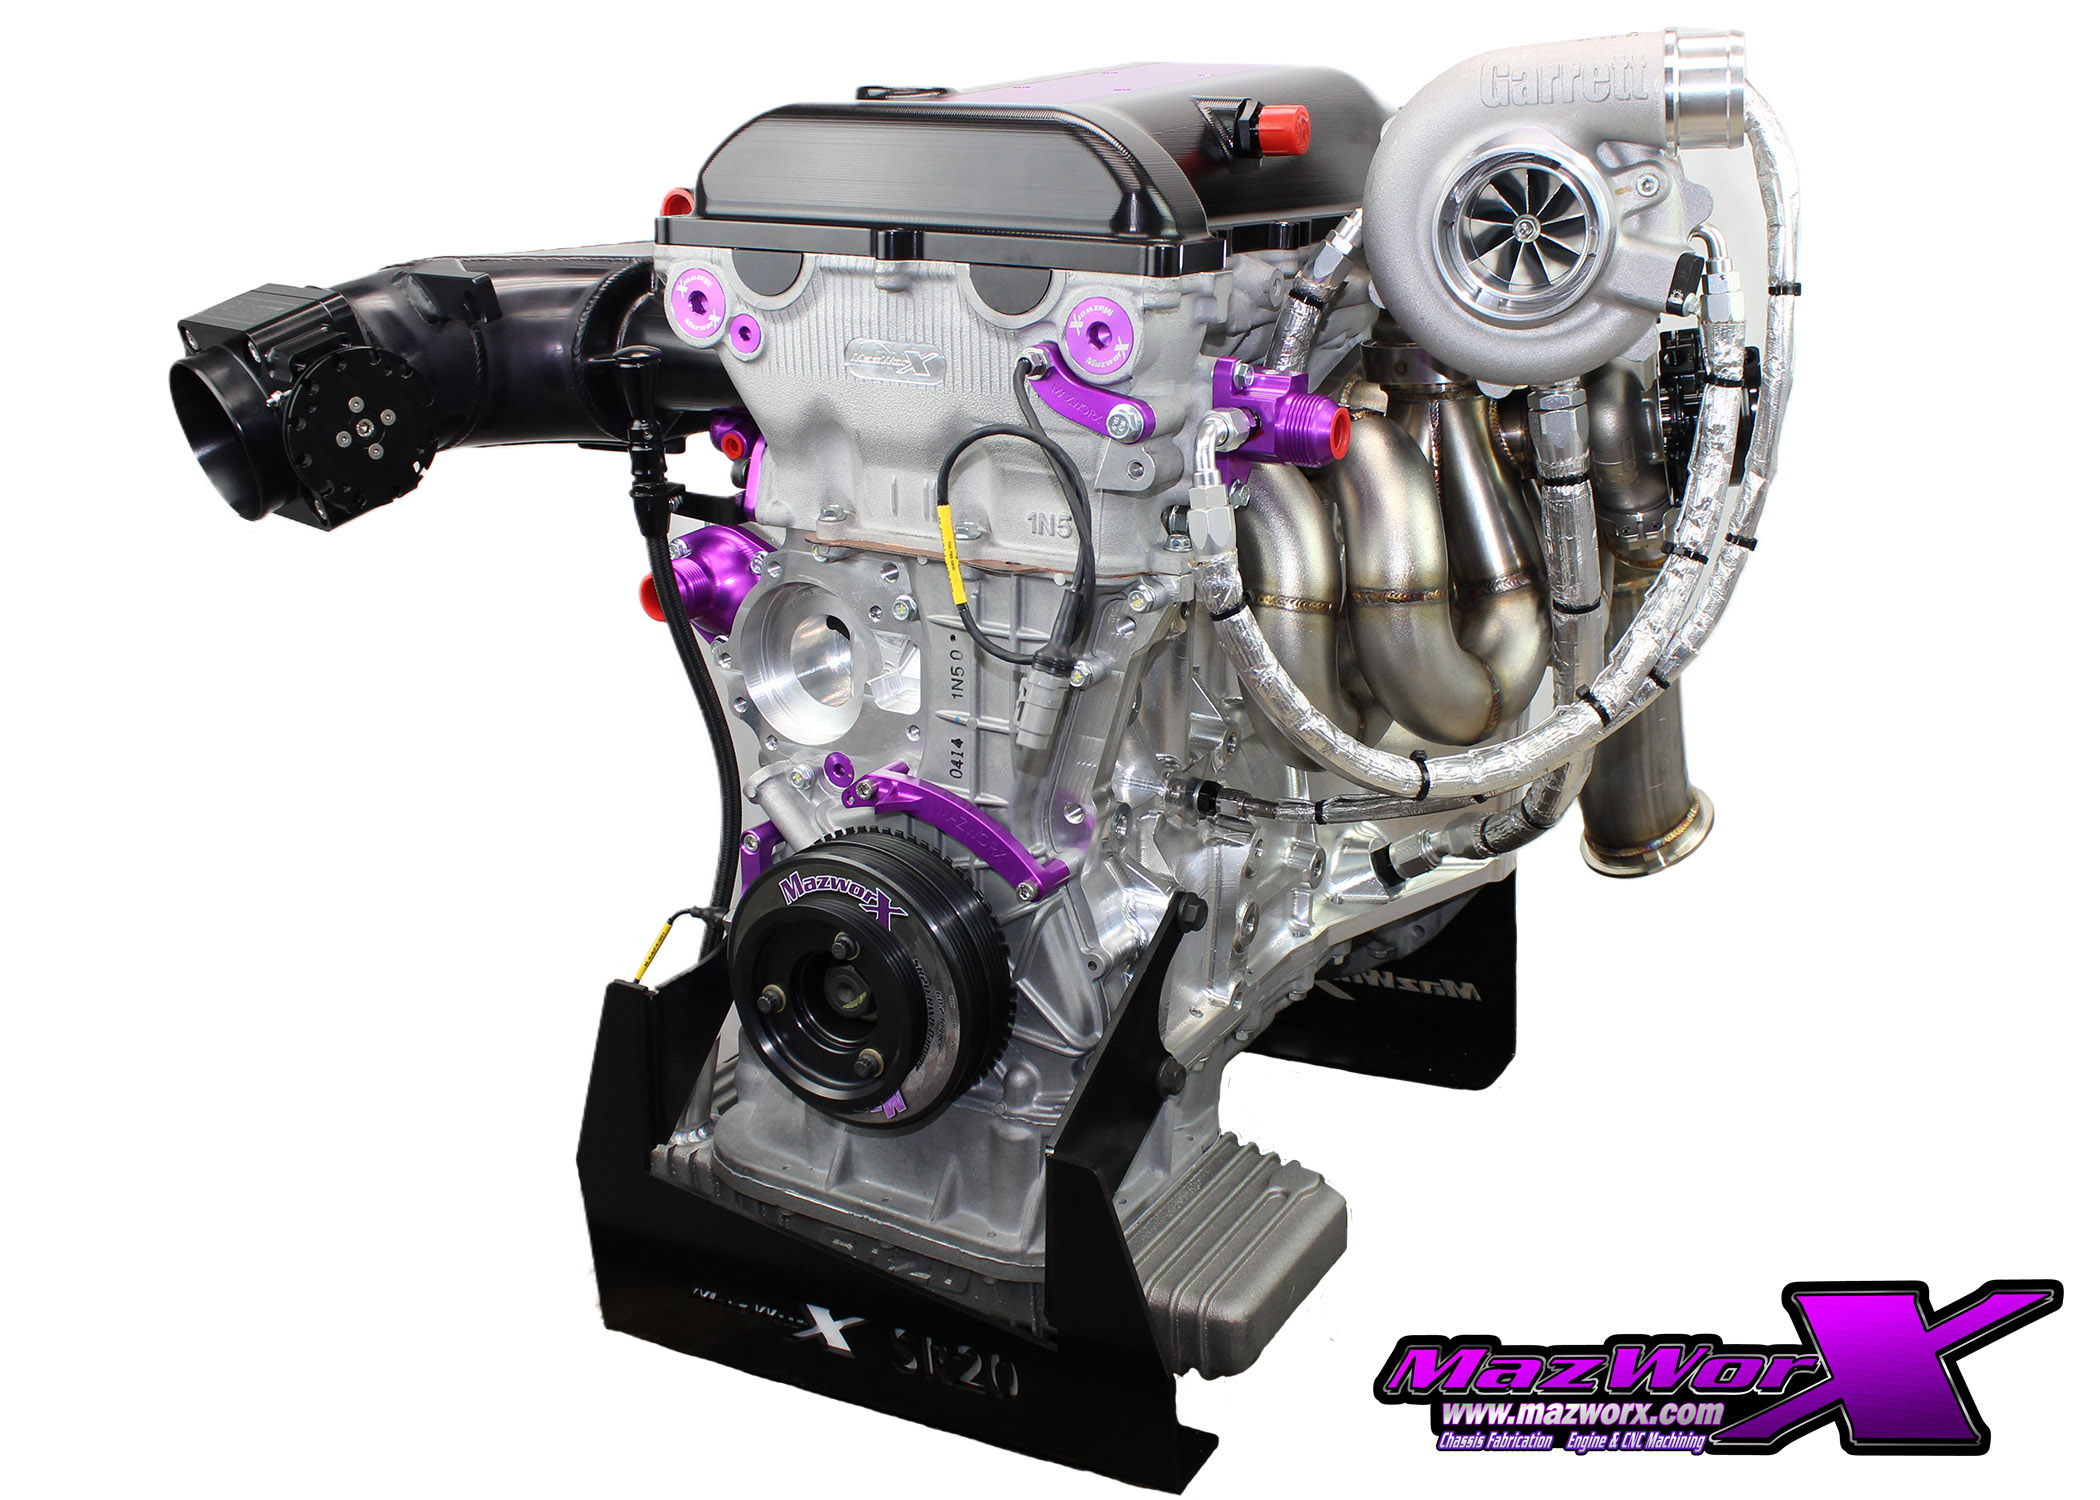 Mazworx Racing Engines, Page 2